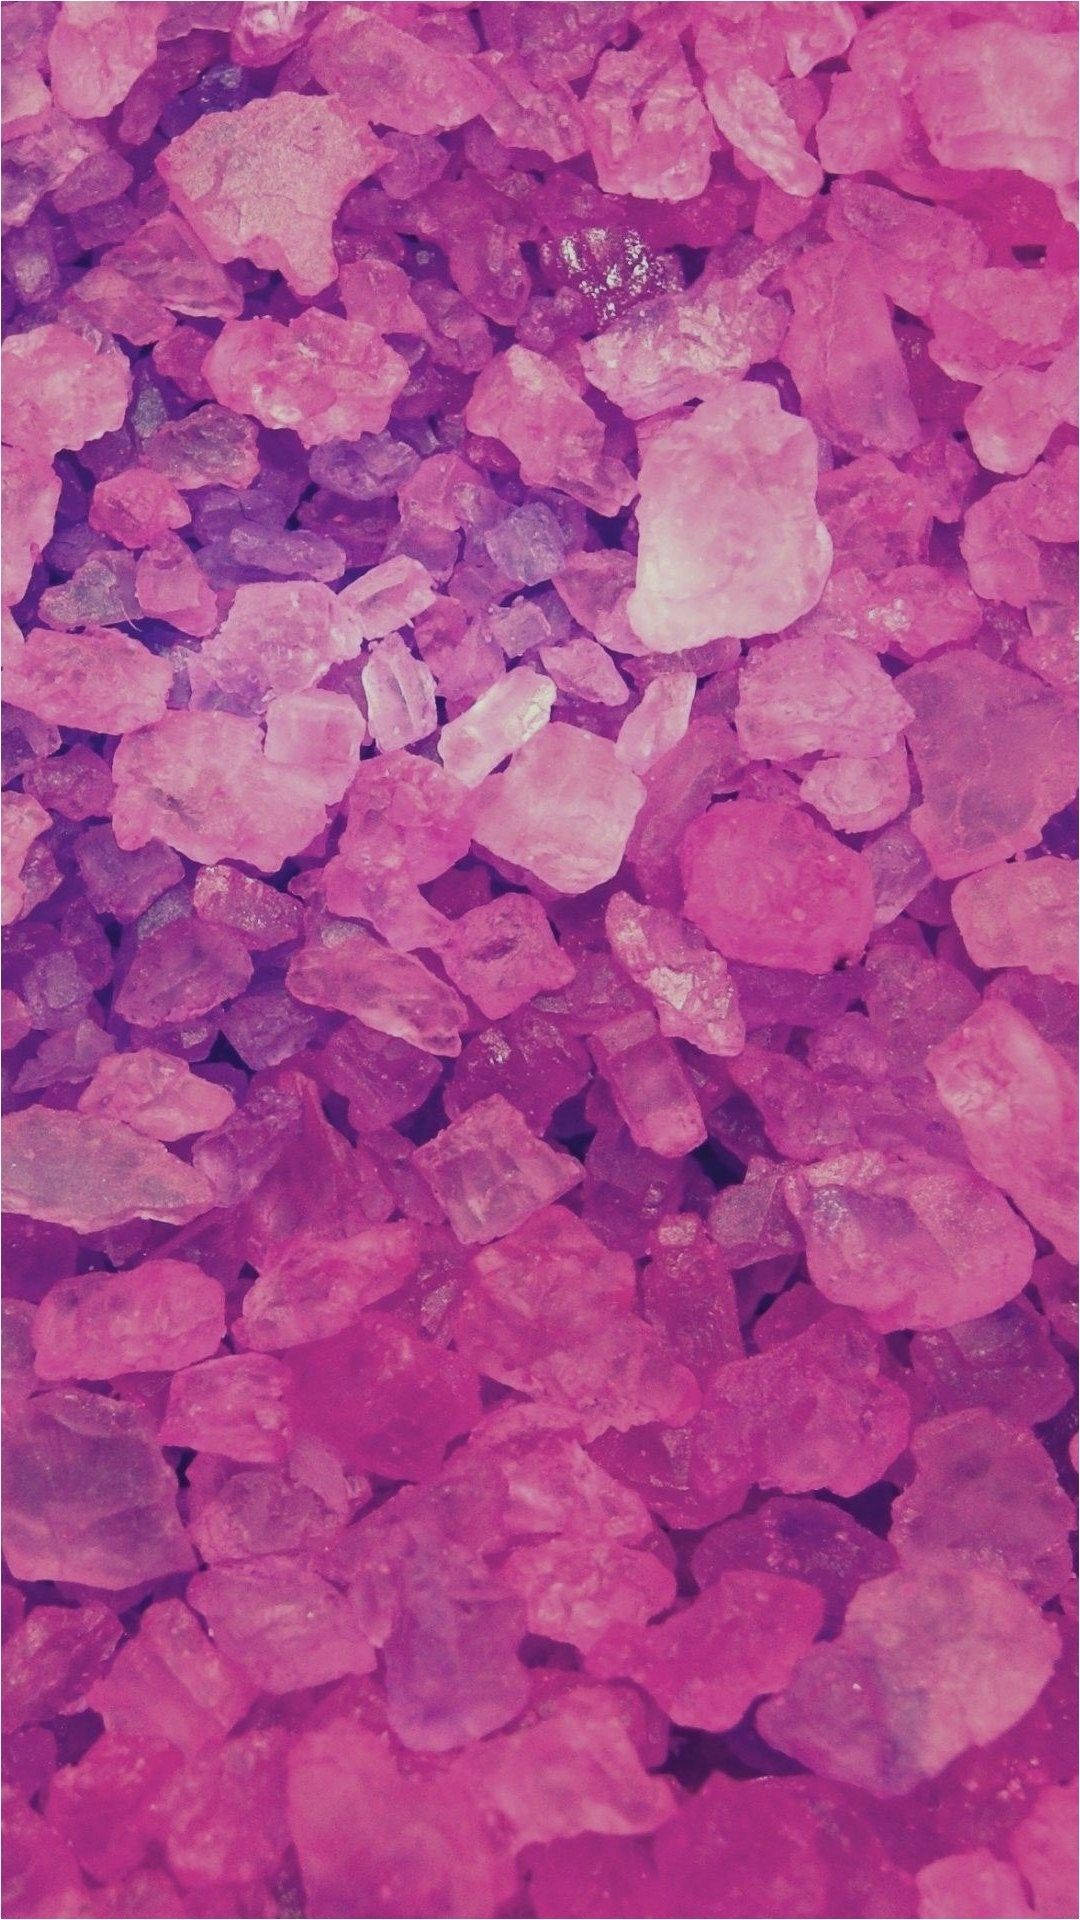 Crystal Girly Lock Screen Iphone Background